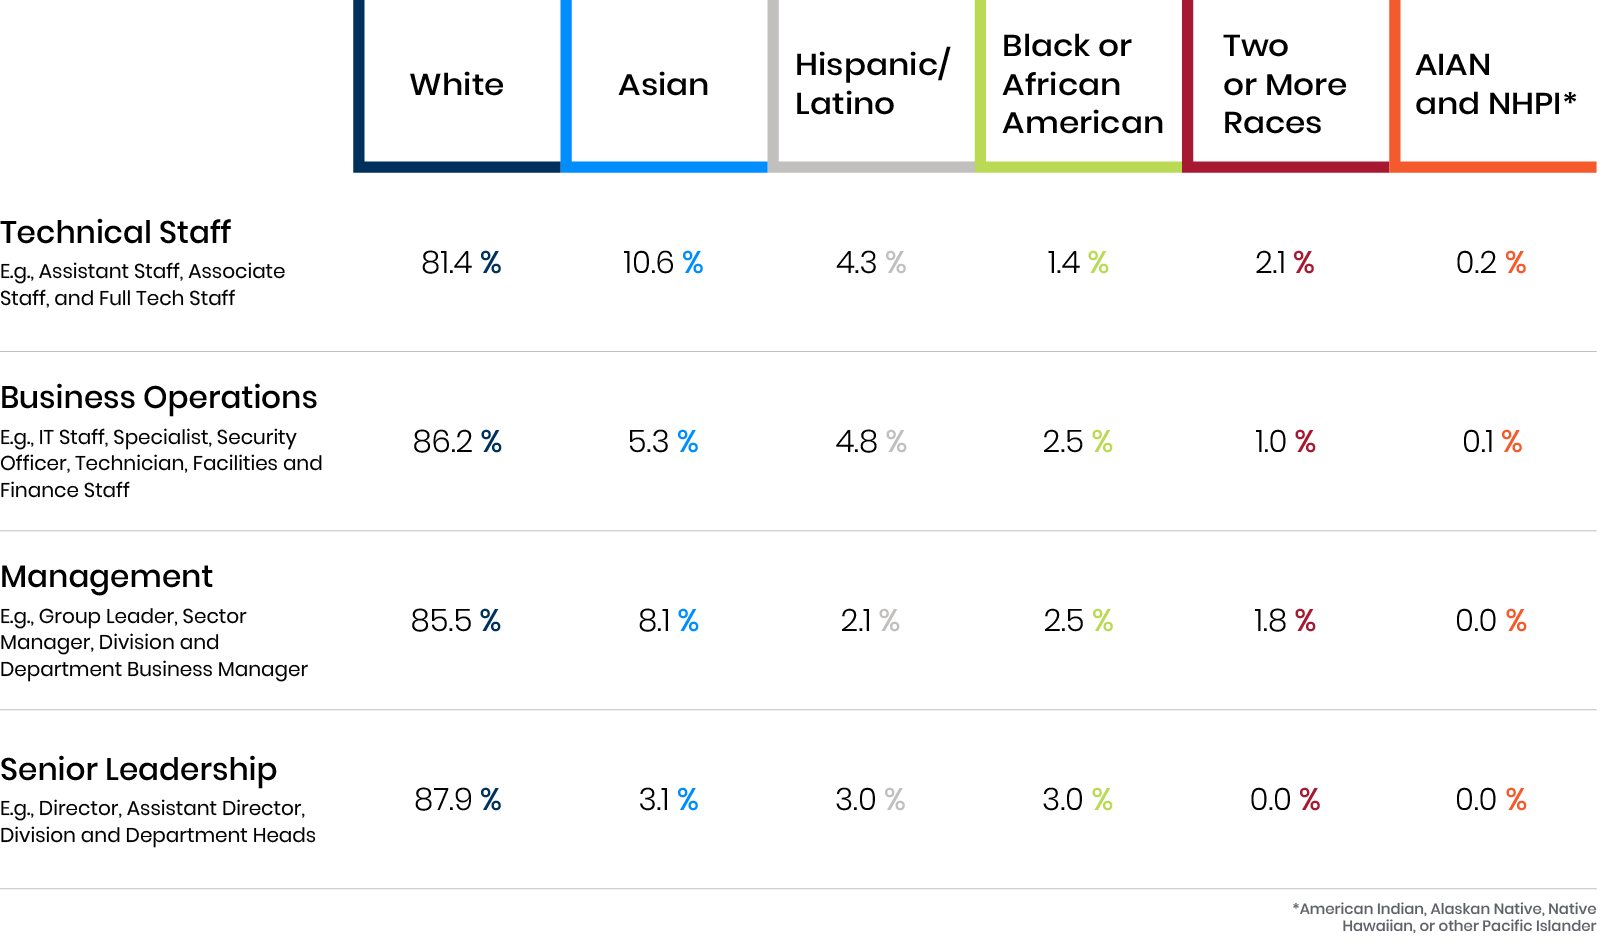 Table breakdown of career level by race and ethnicity